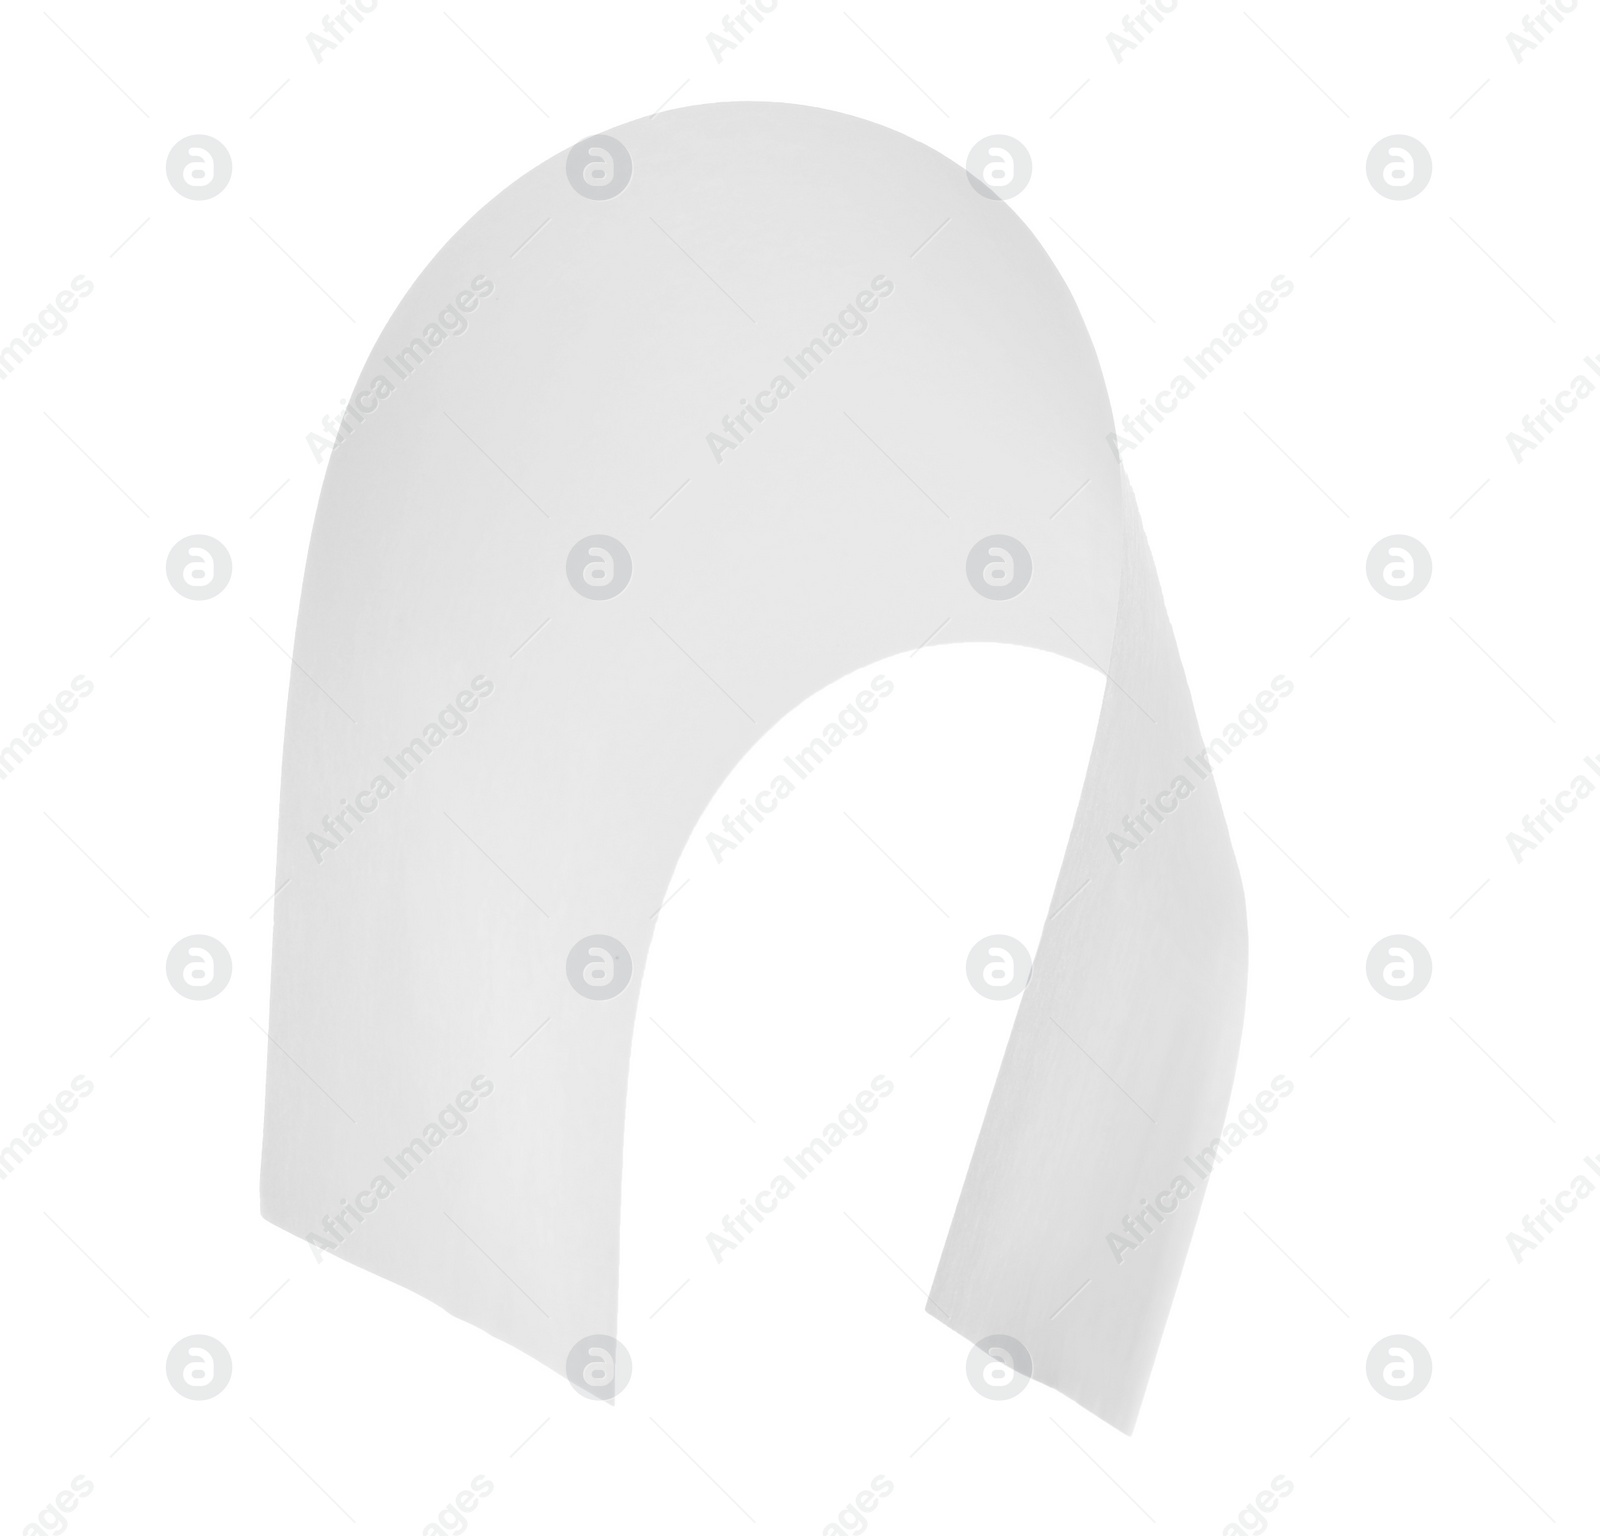 Photo of One sheet of paper isolated on white